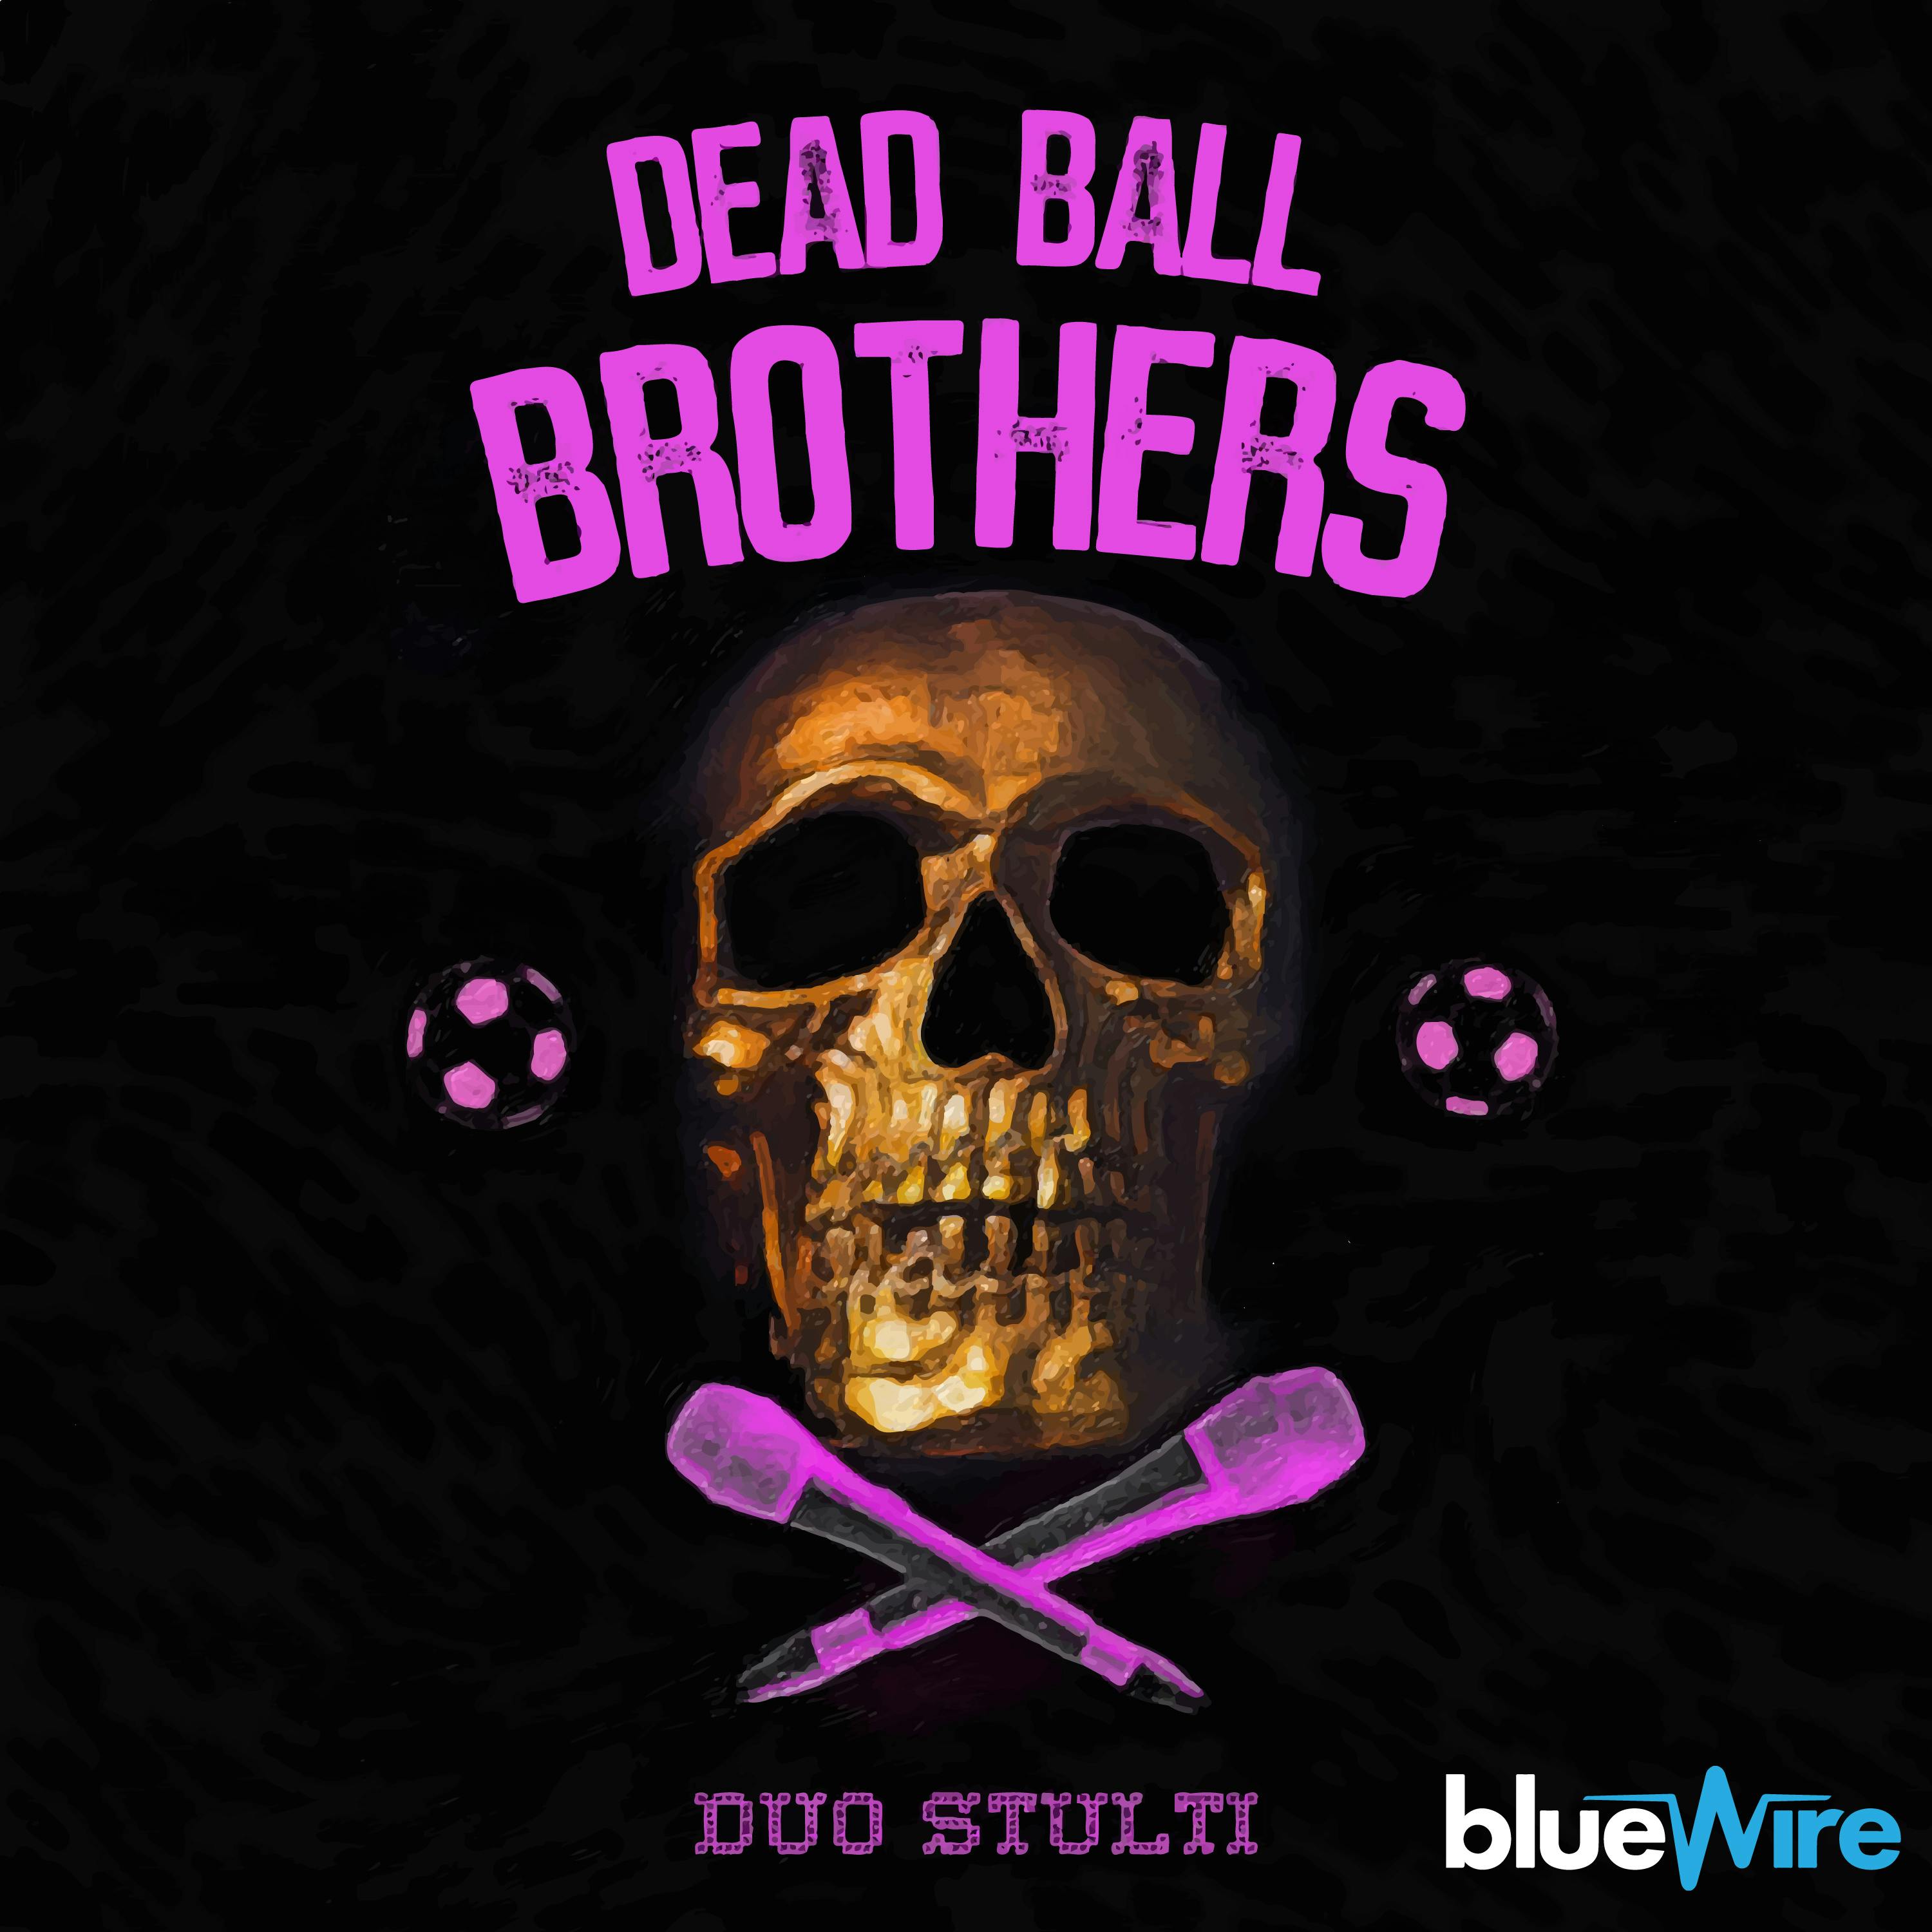 Dead Ball Brothers